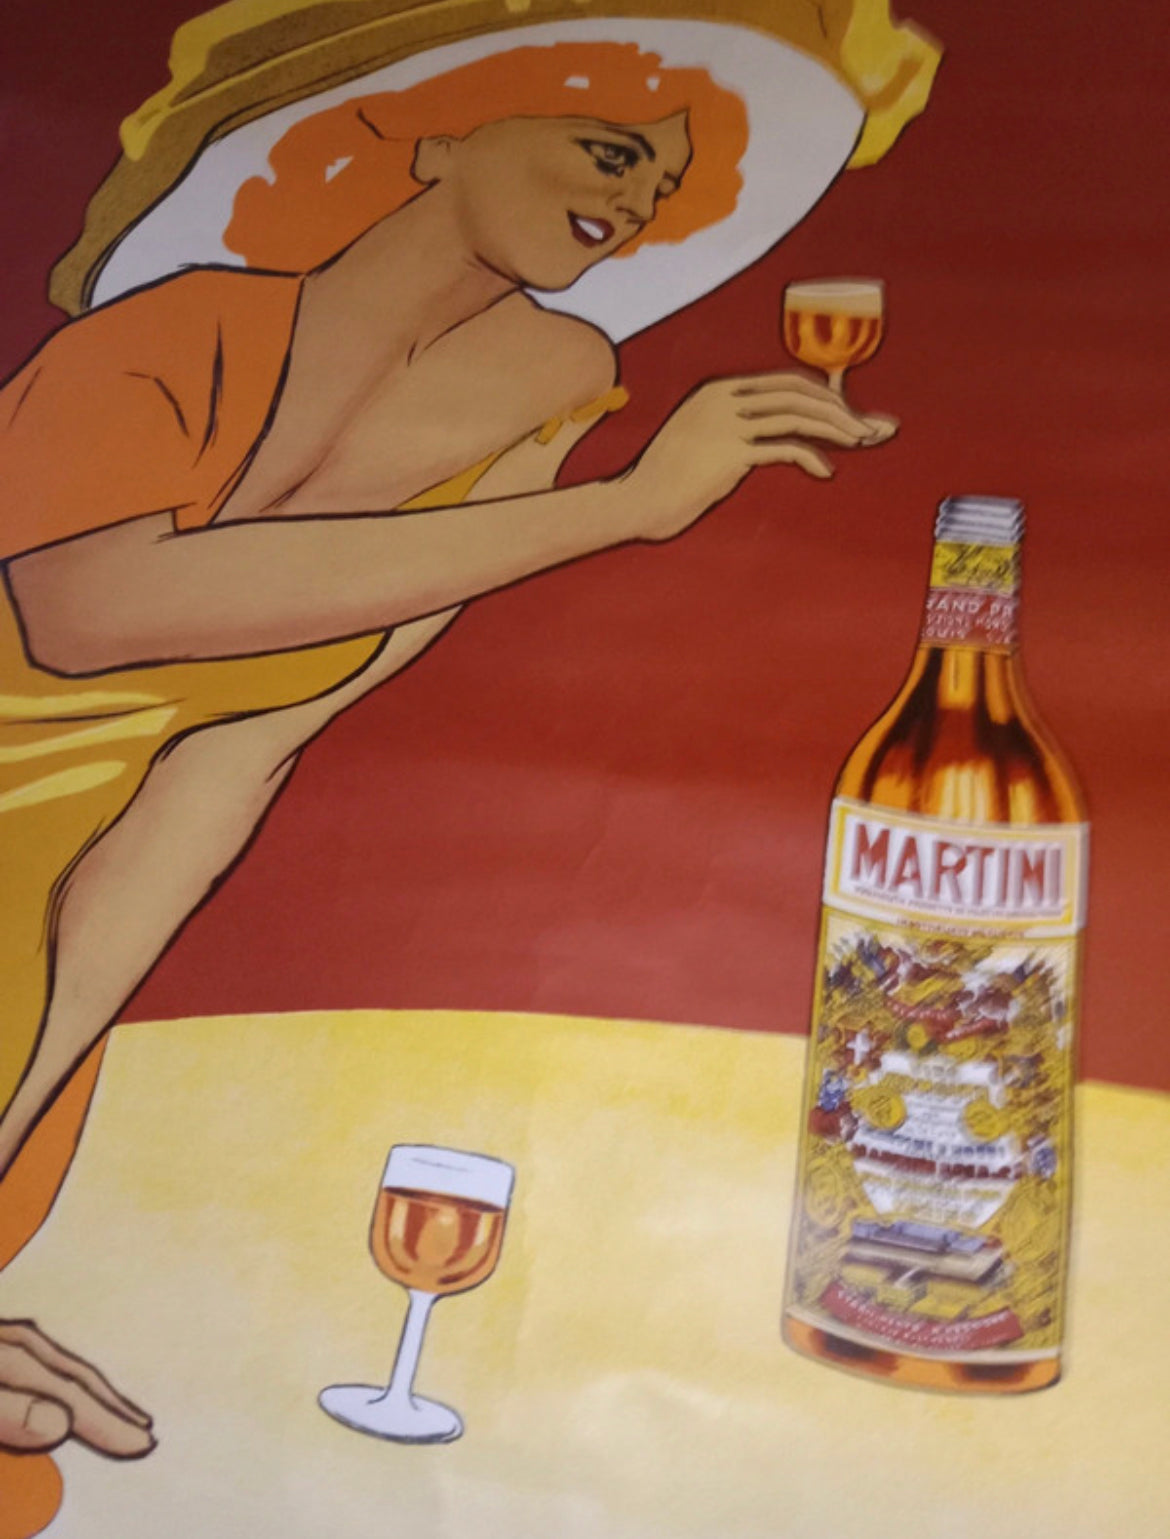 Original Martini &amp; Rossi Turin poster from the 70s